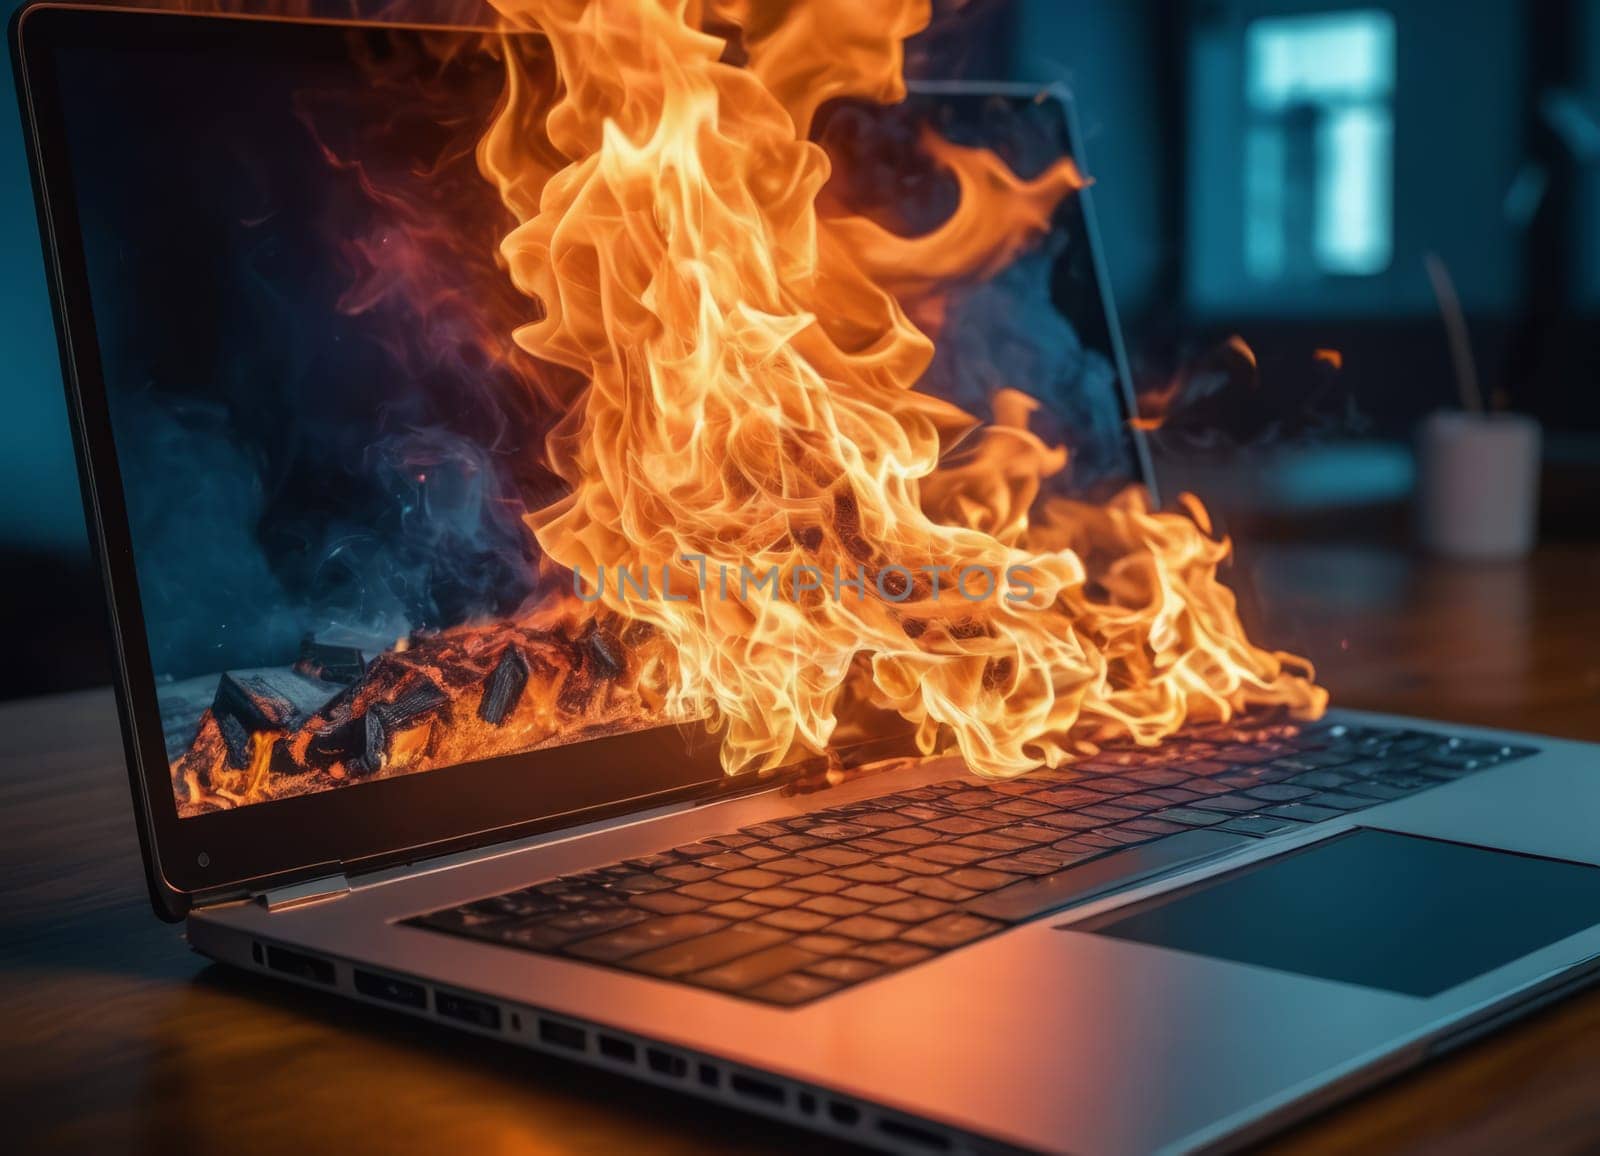 Laptop on Fire with Intense Flames by Andre1ns